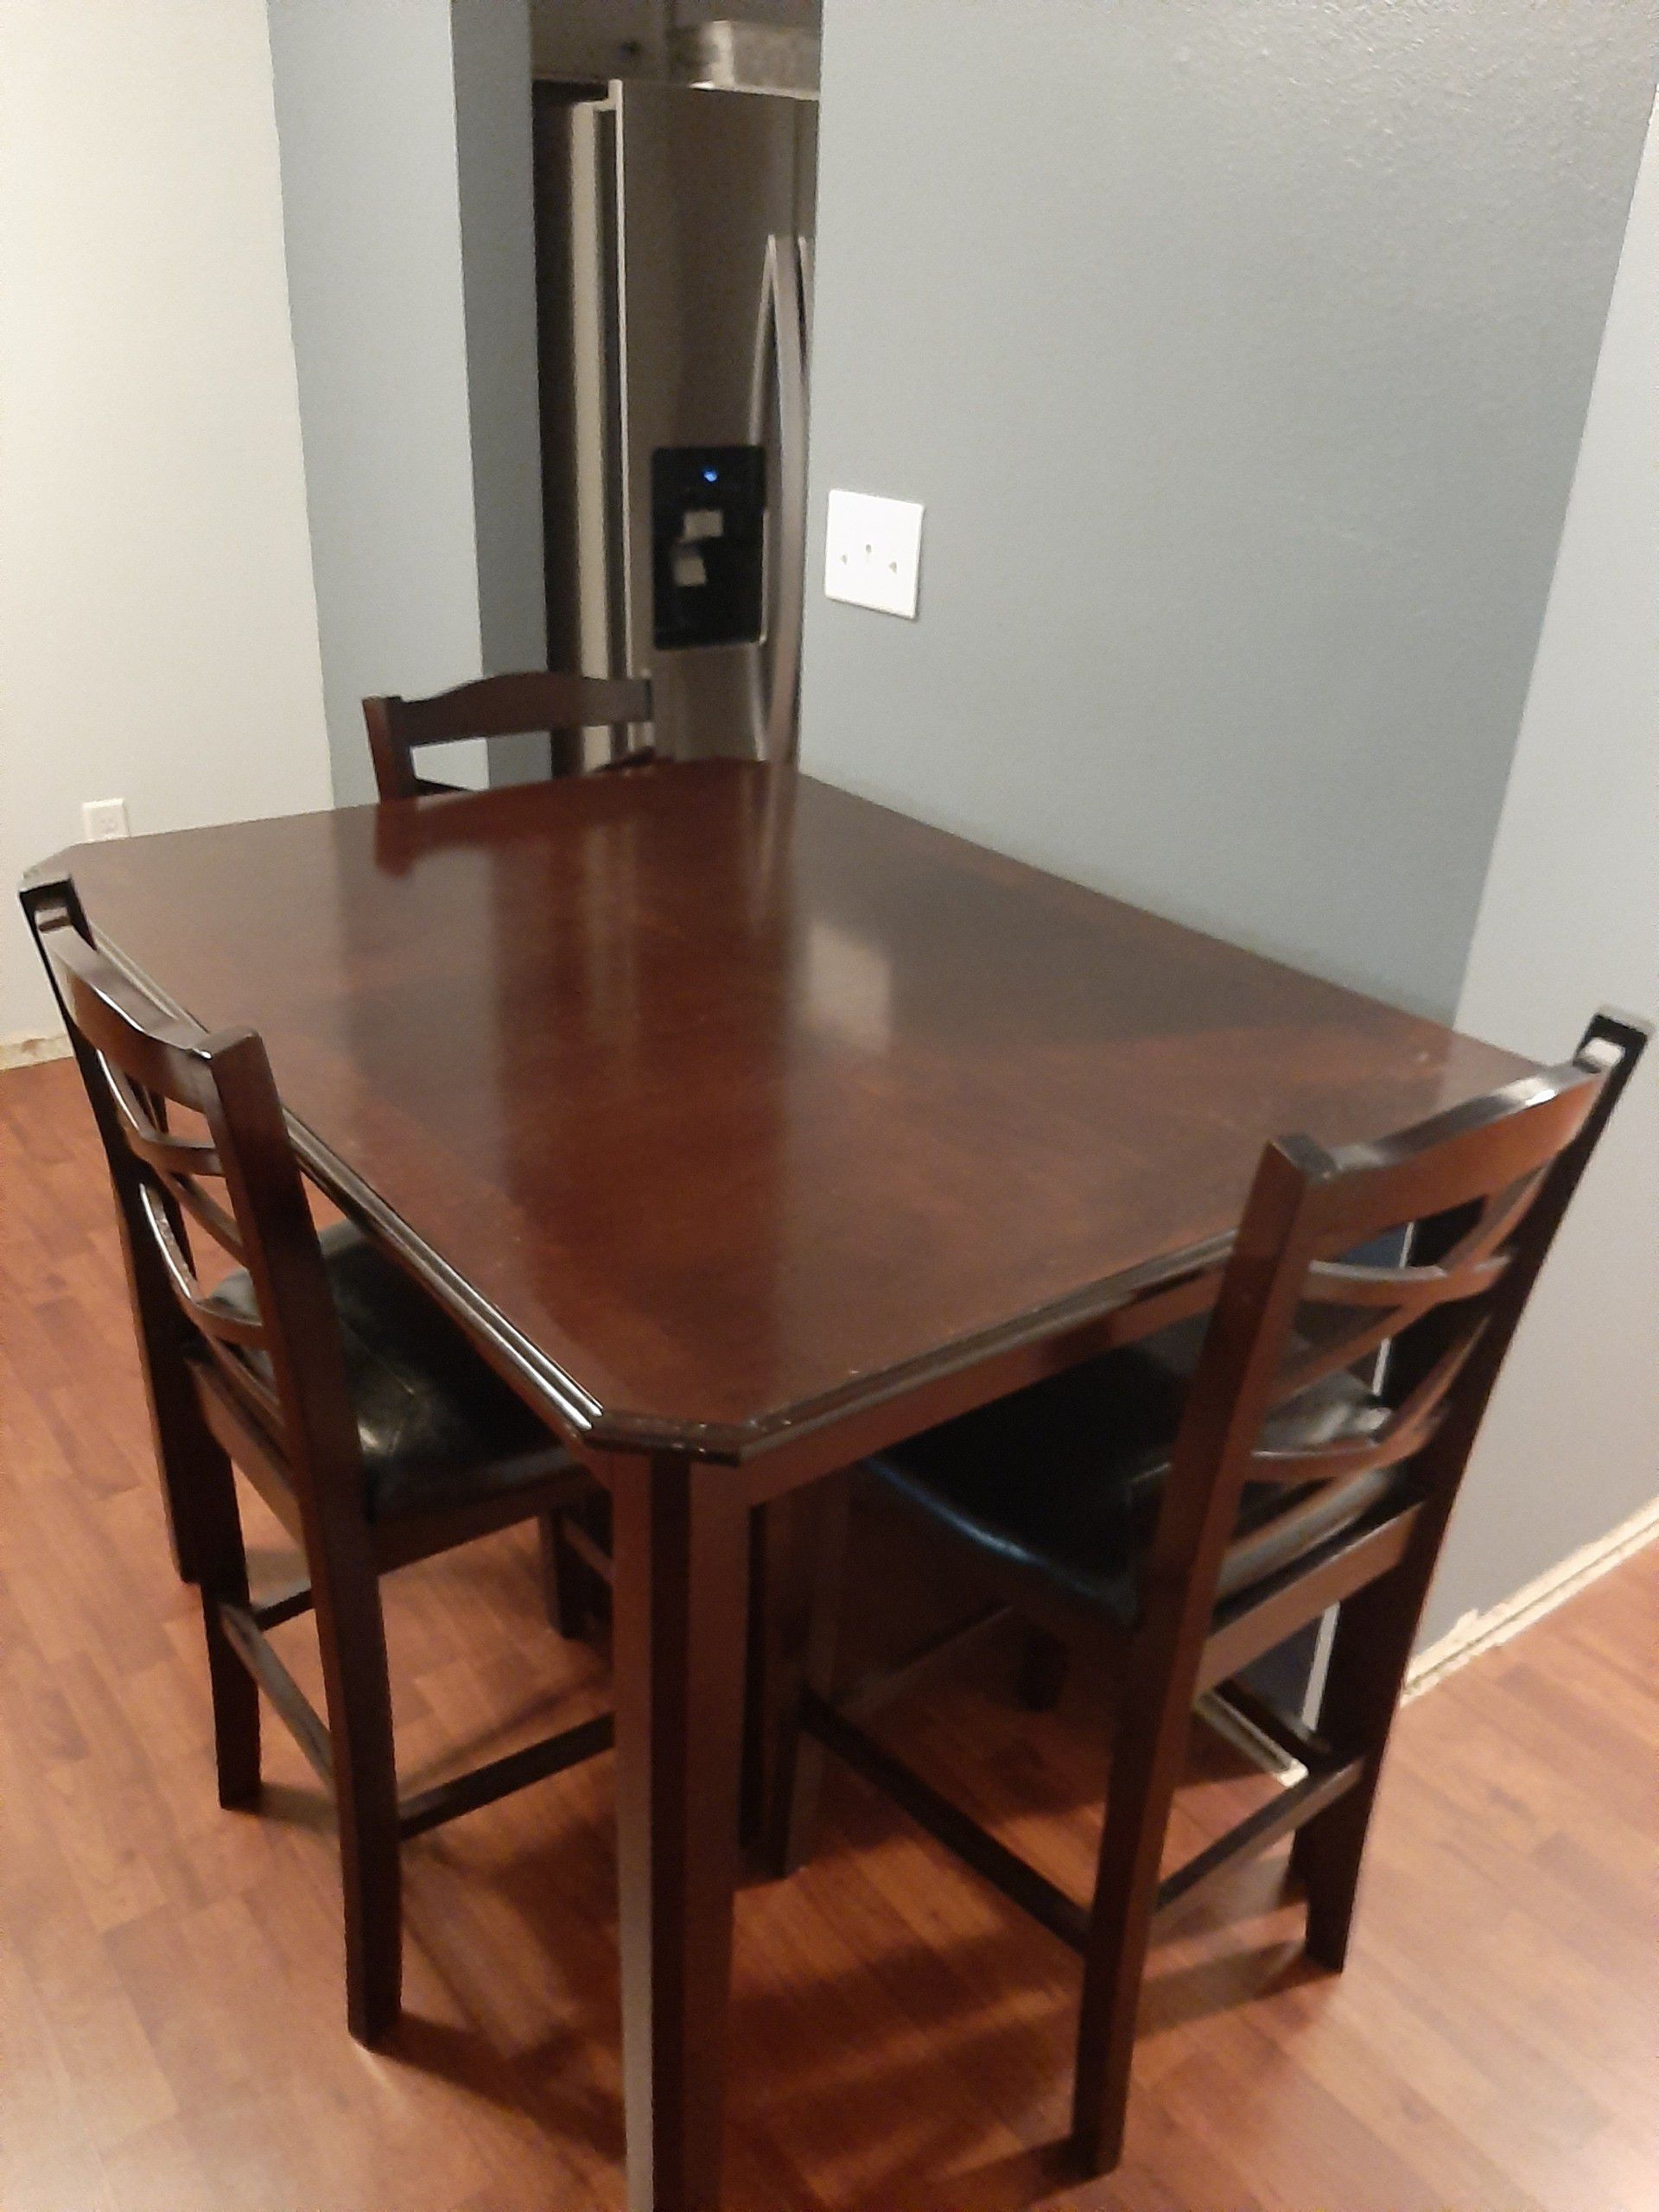 Cafe style dining table